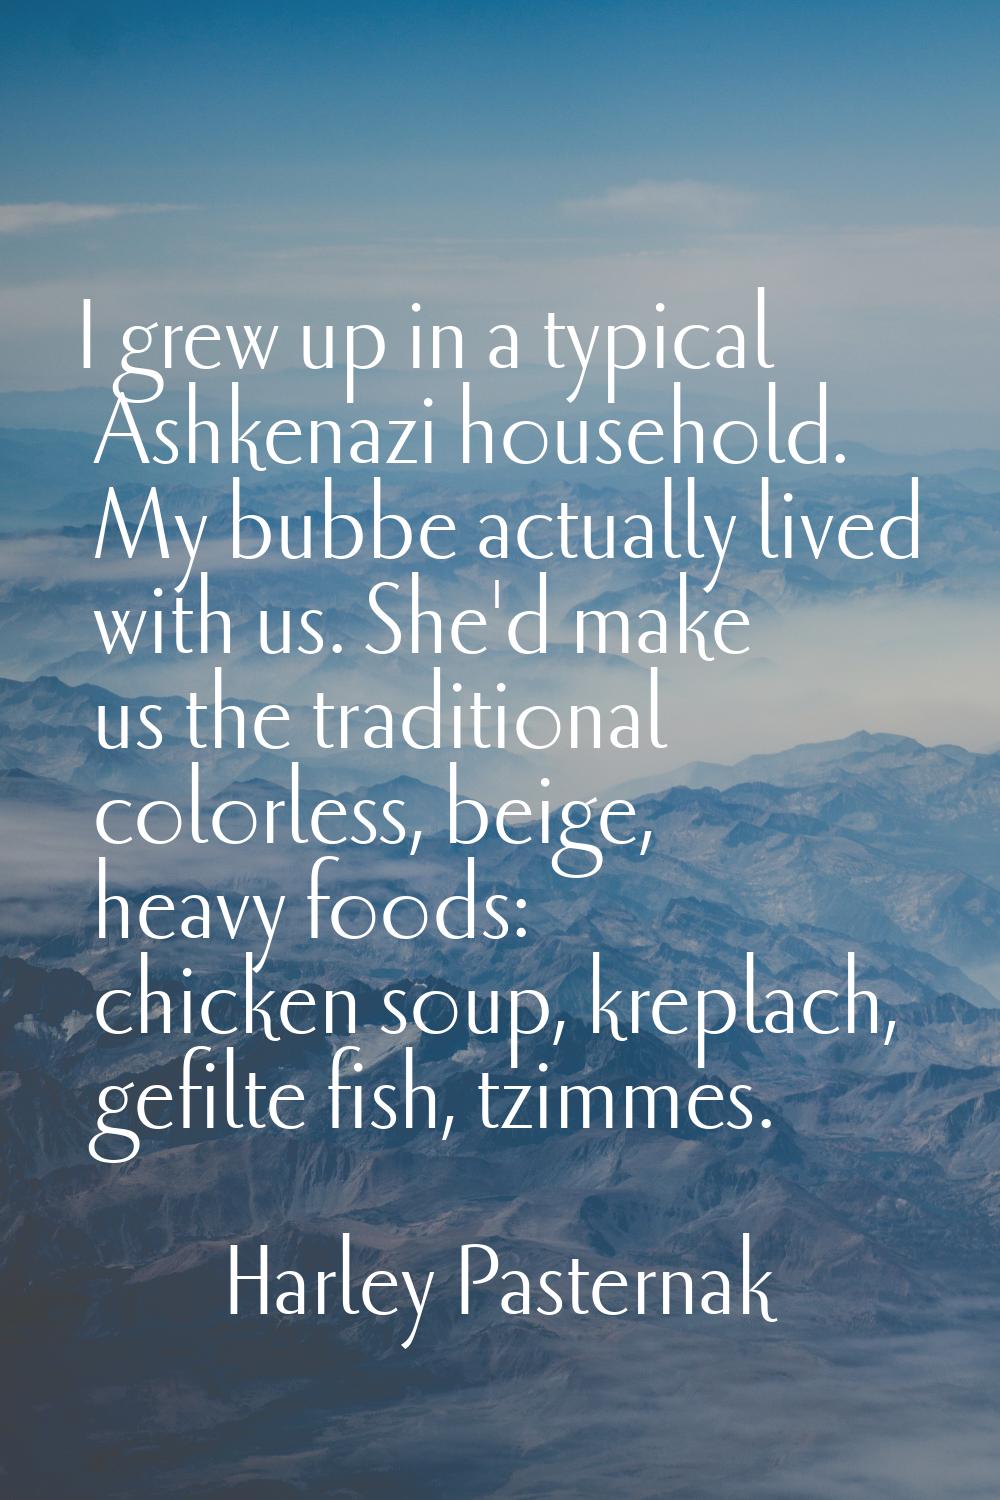 I grew up in a typical Ashkenazi household. My bubbe actually lived with us. She'd make us the trad